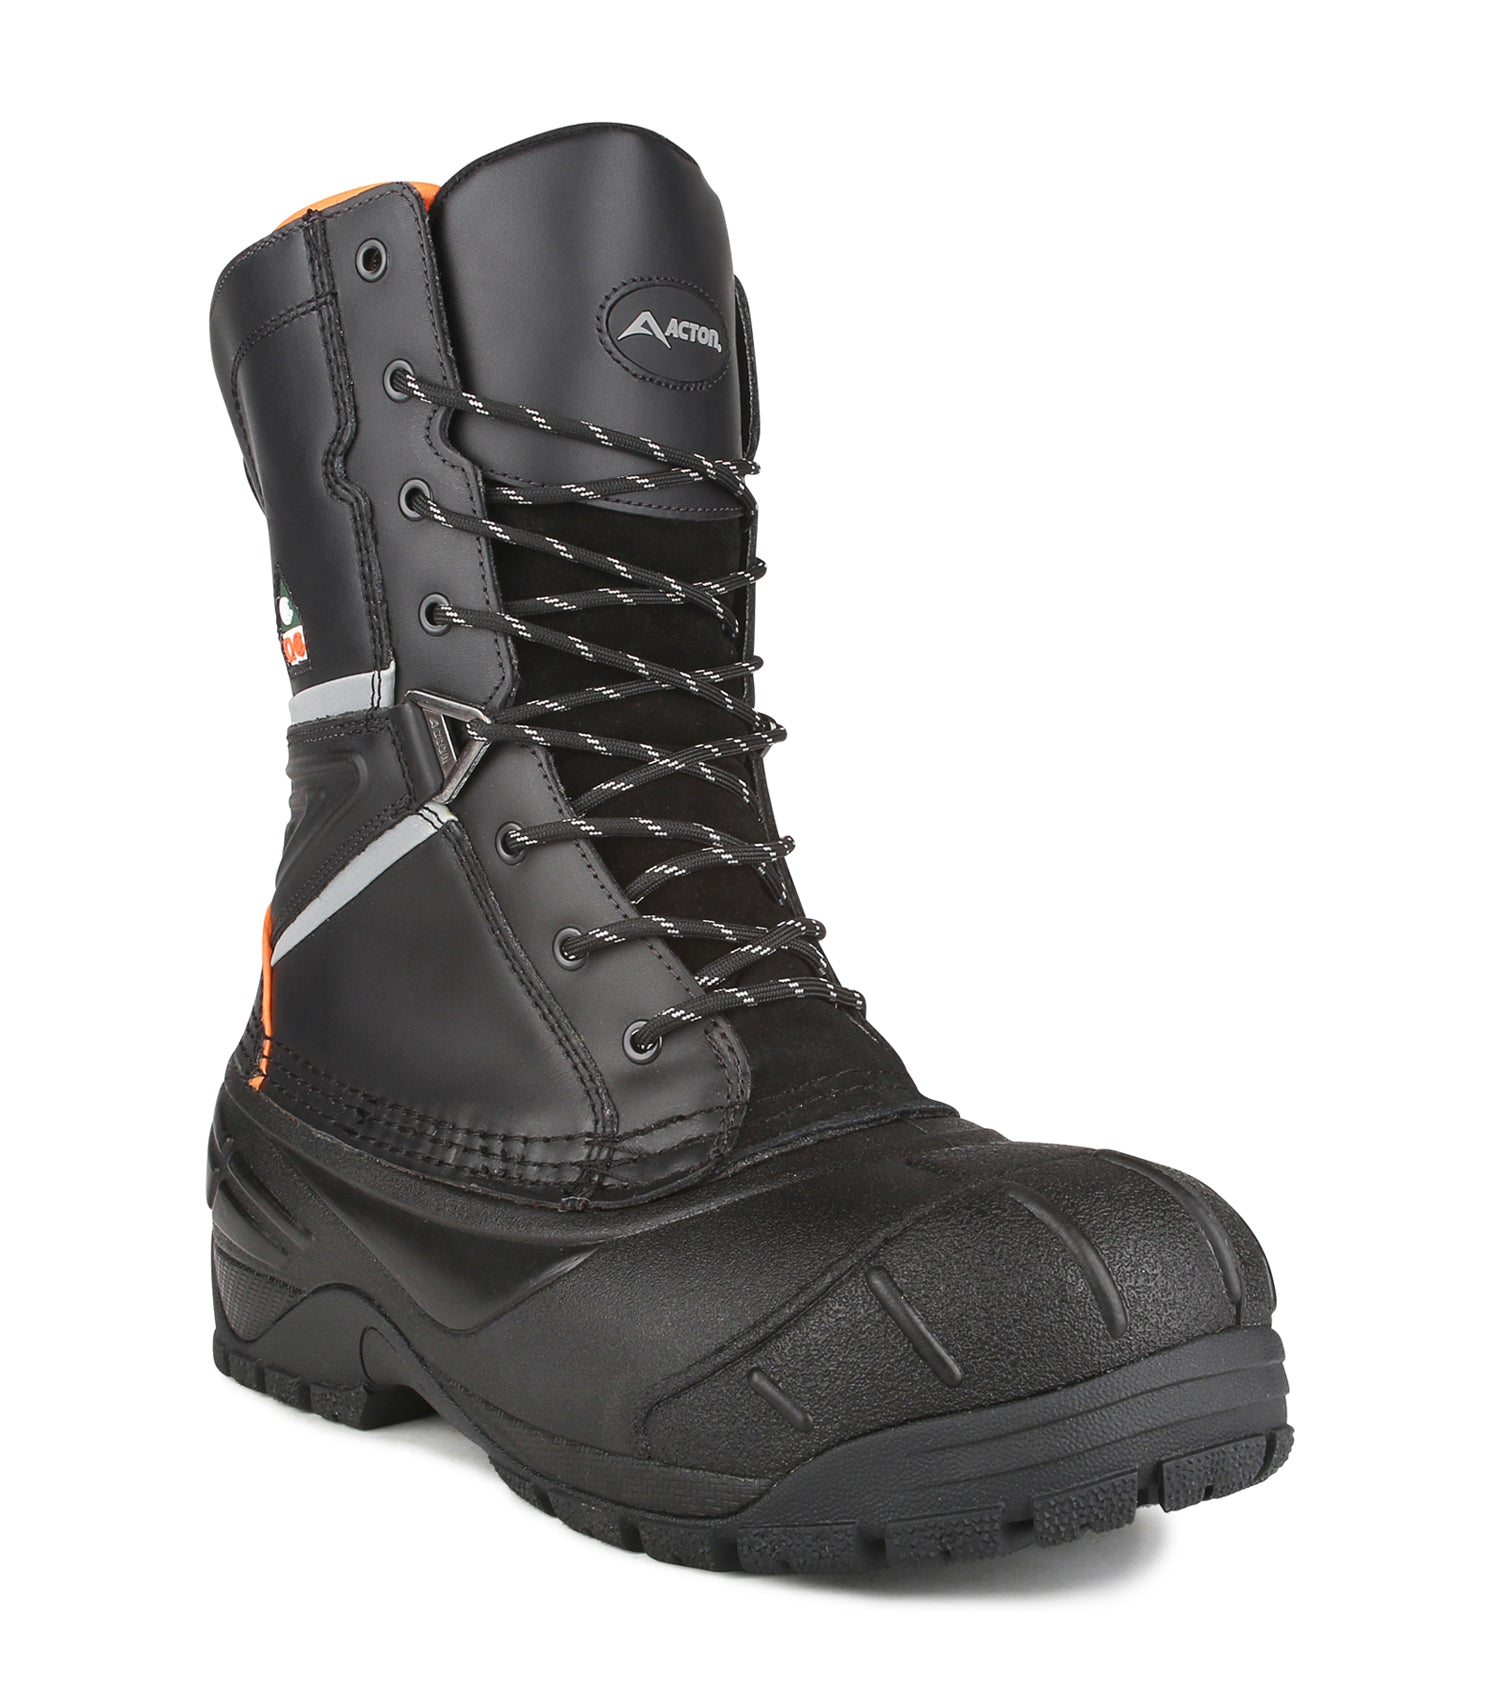 Winter Work Boots - Extreme Cold Weather Work Boots – ROYER